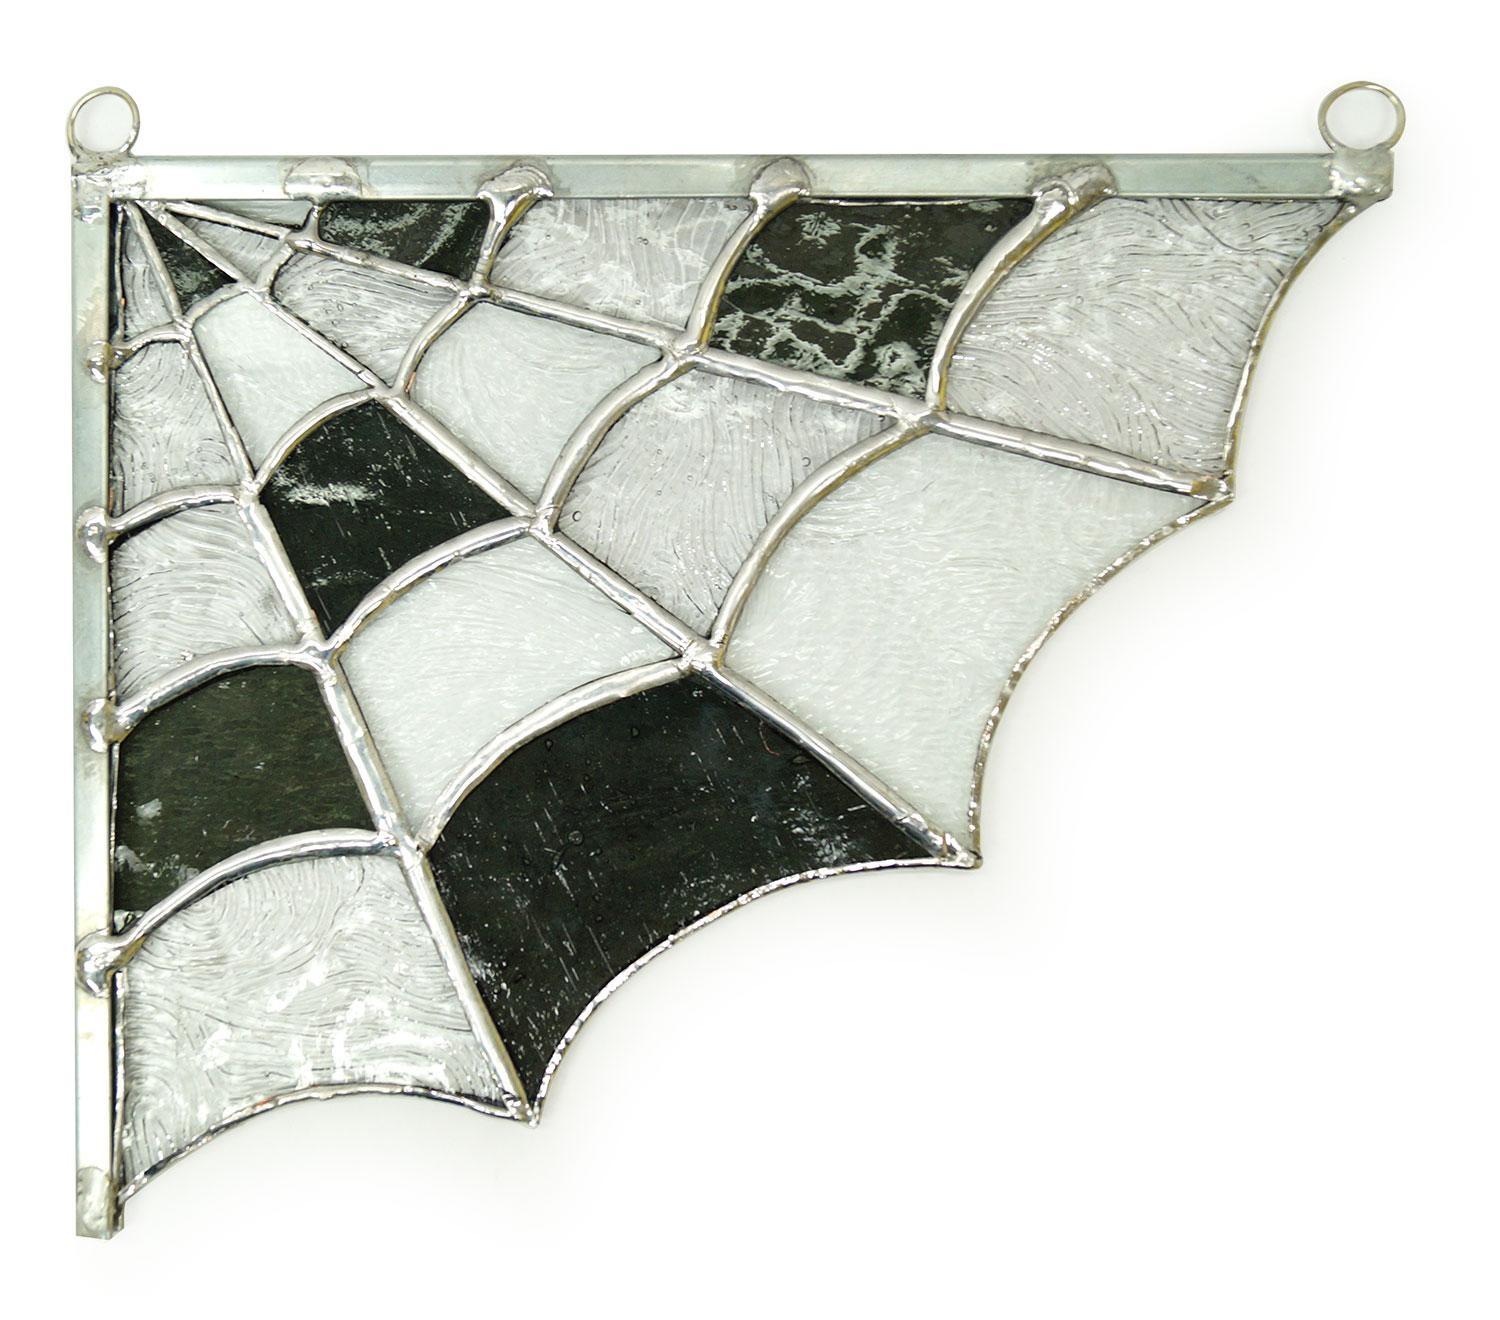 Lynn Urban, Stained Glass Spider Web